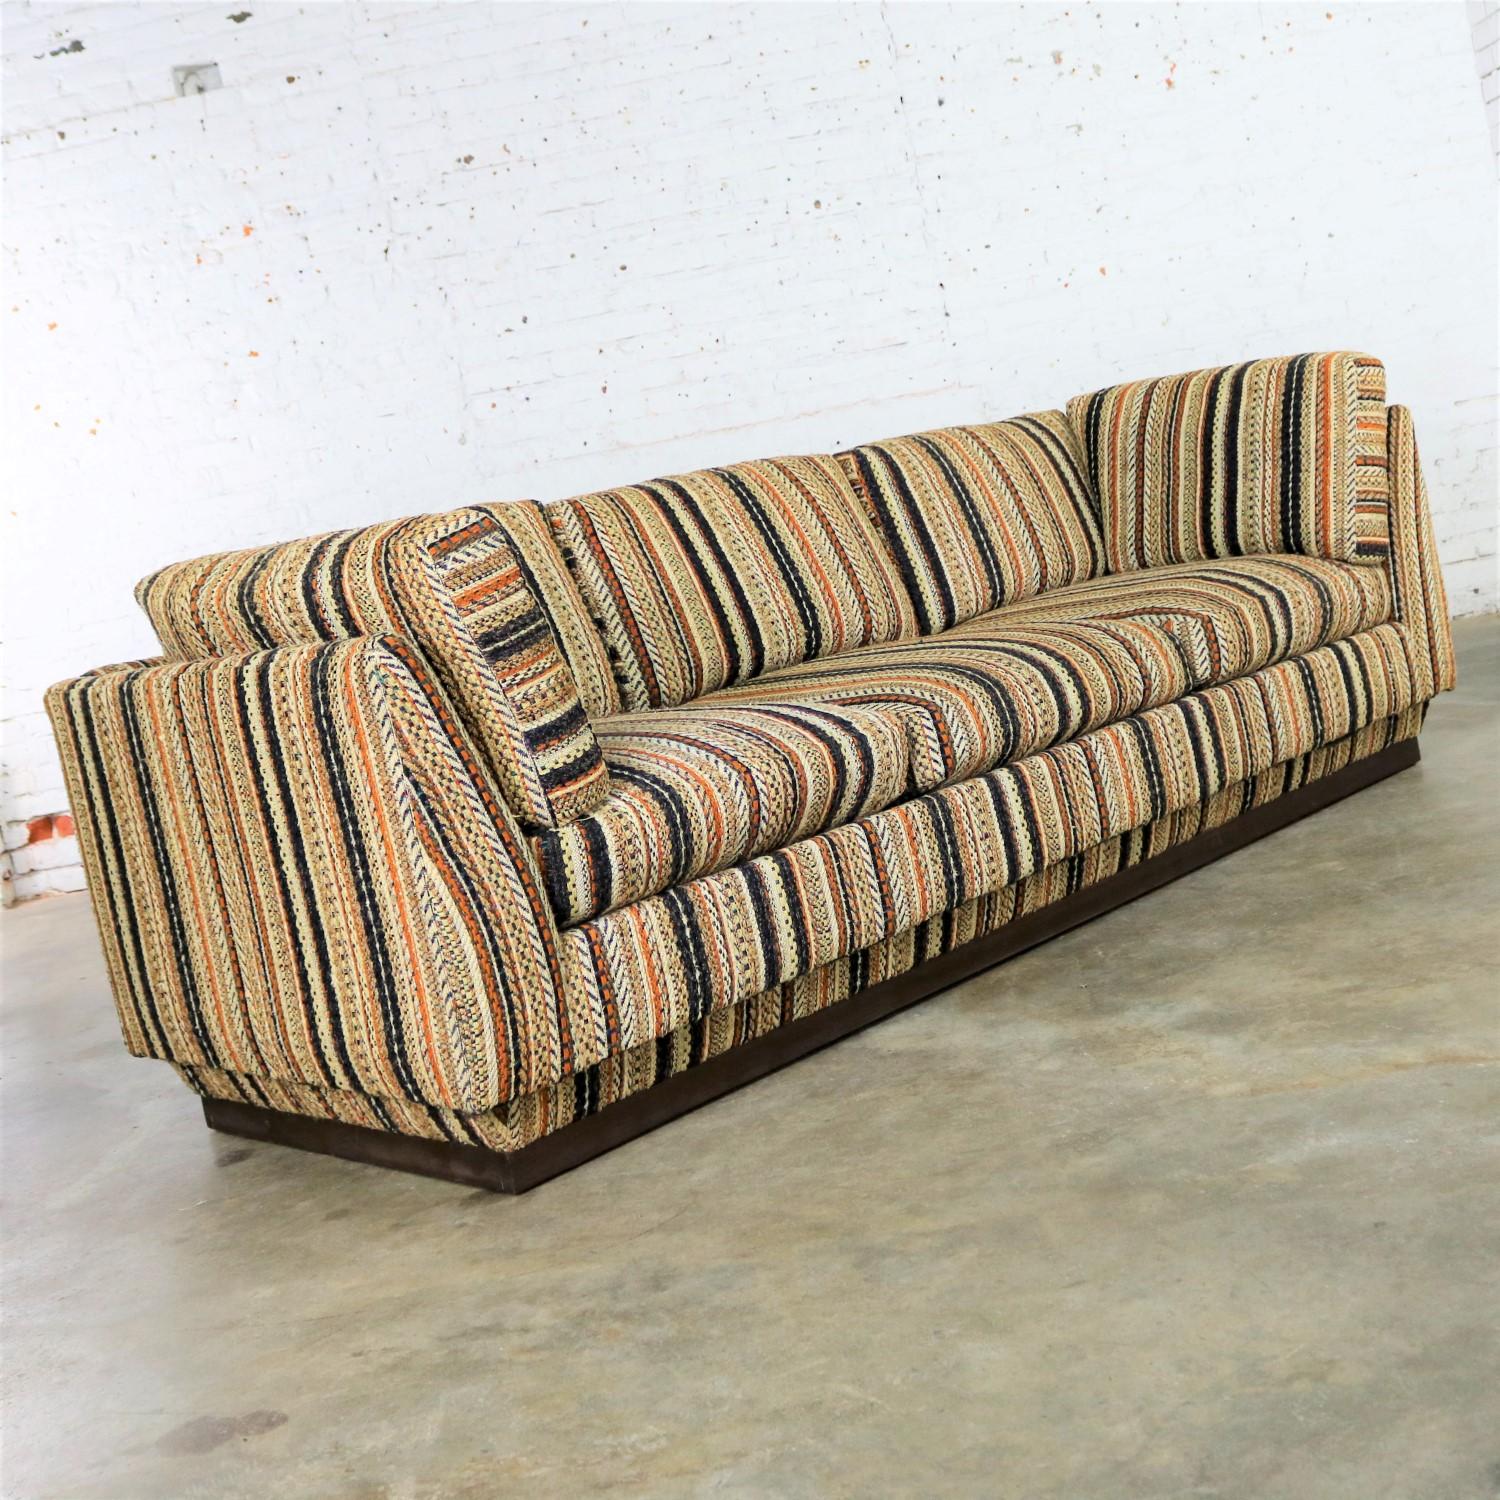 Lee Harvey original by Maddox Mid-Century Modern platform tuxedo sofa in its original striped fabric. This sofa is in fabulous vintage condition. Including the fabric. Apart from a small hole in the inside back which is hidden by the seat cushion.